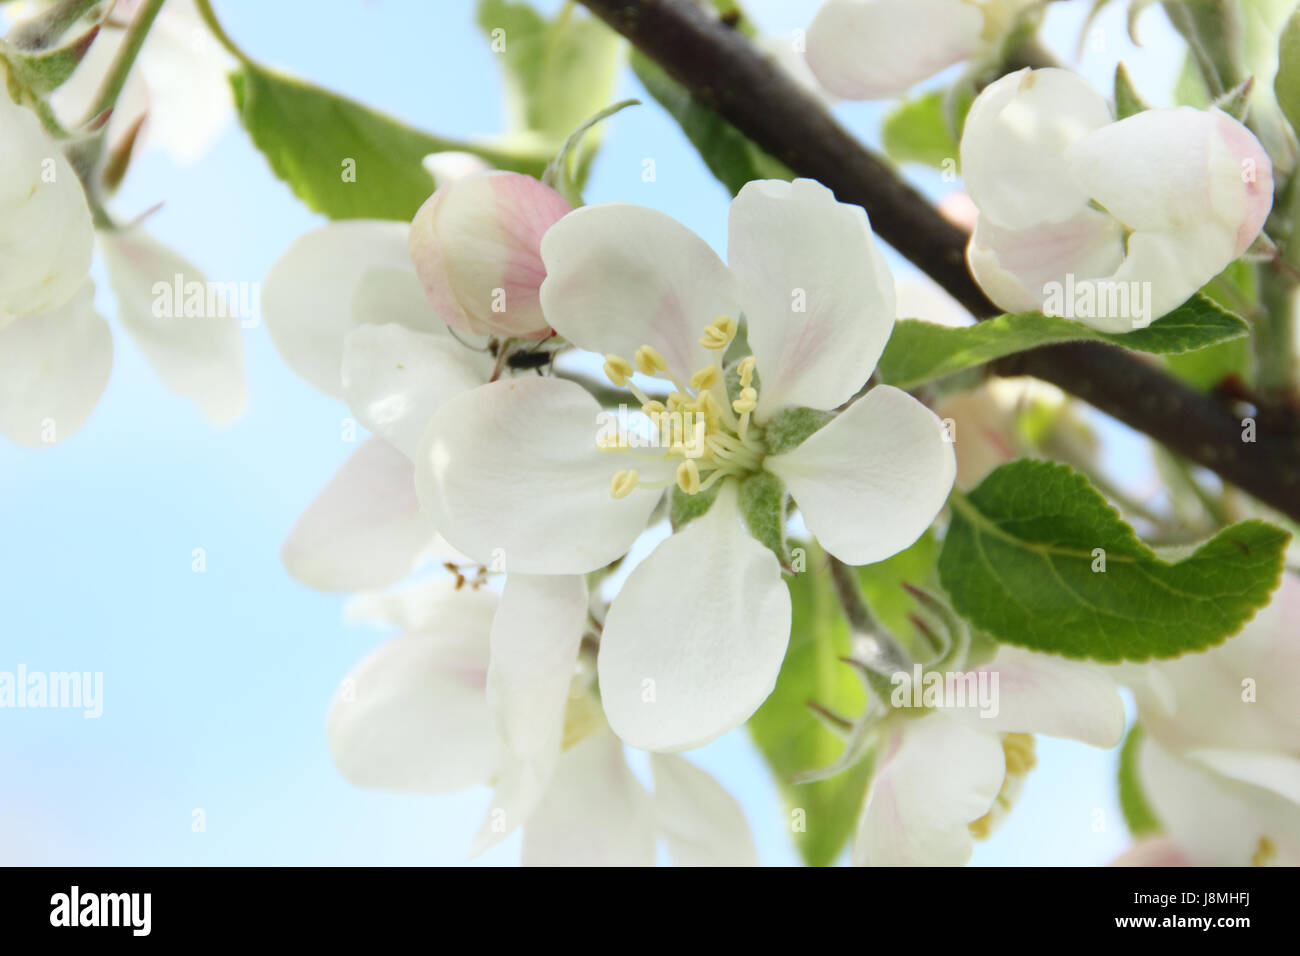 Malus domestica 'Discovery' apple tree blossom in an English orchard on a sunny spring day, England, UK Stock Photo